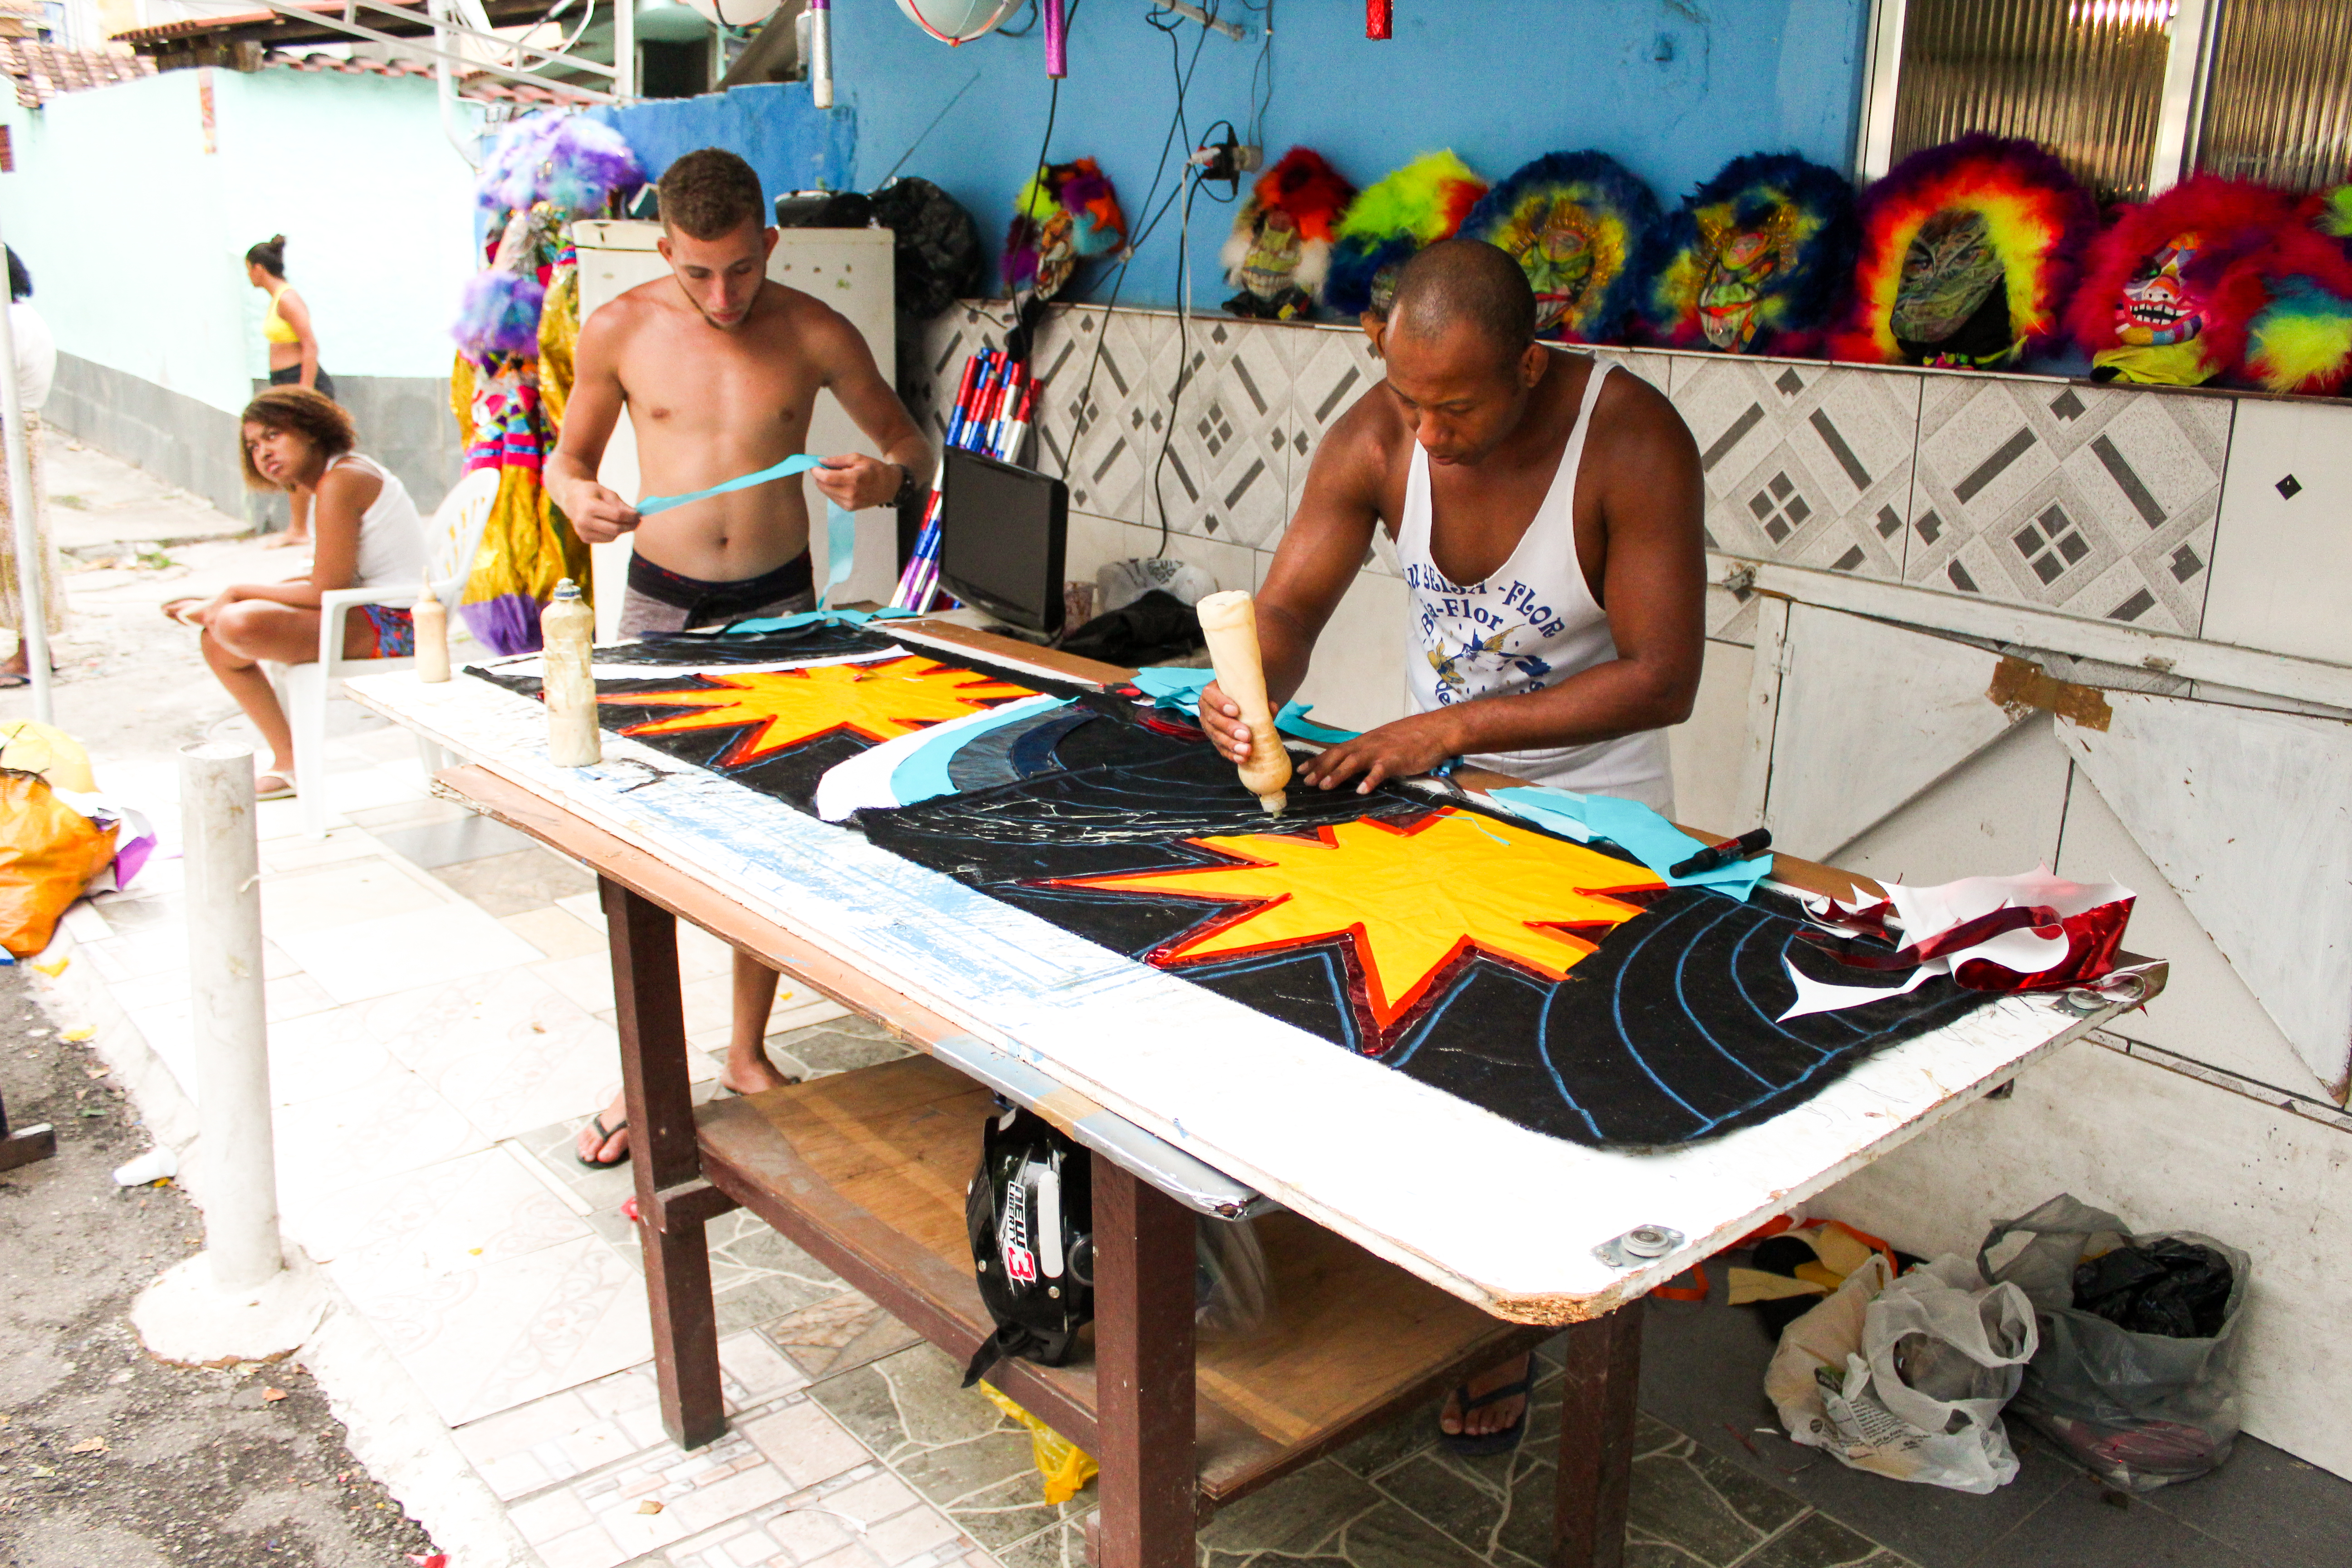 Anderson Luiz, known as "Playboy," working on costumes. Photo: Jota Marques